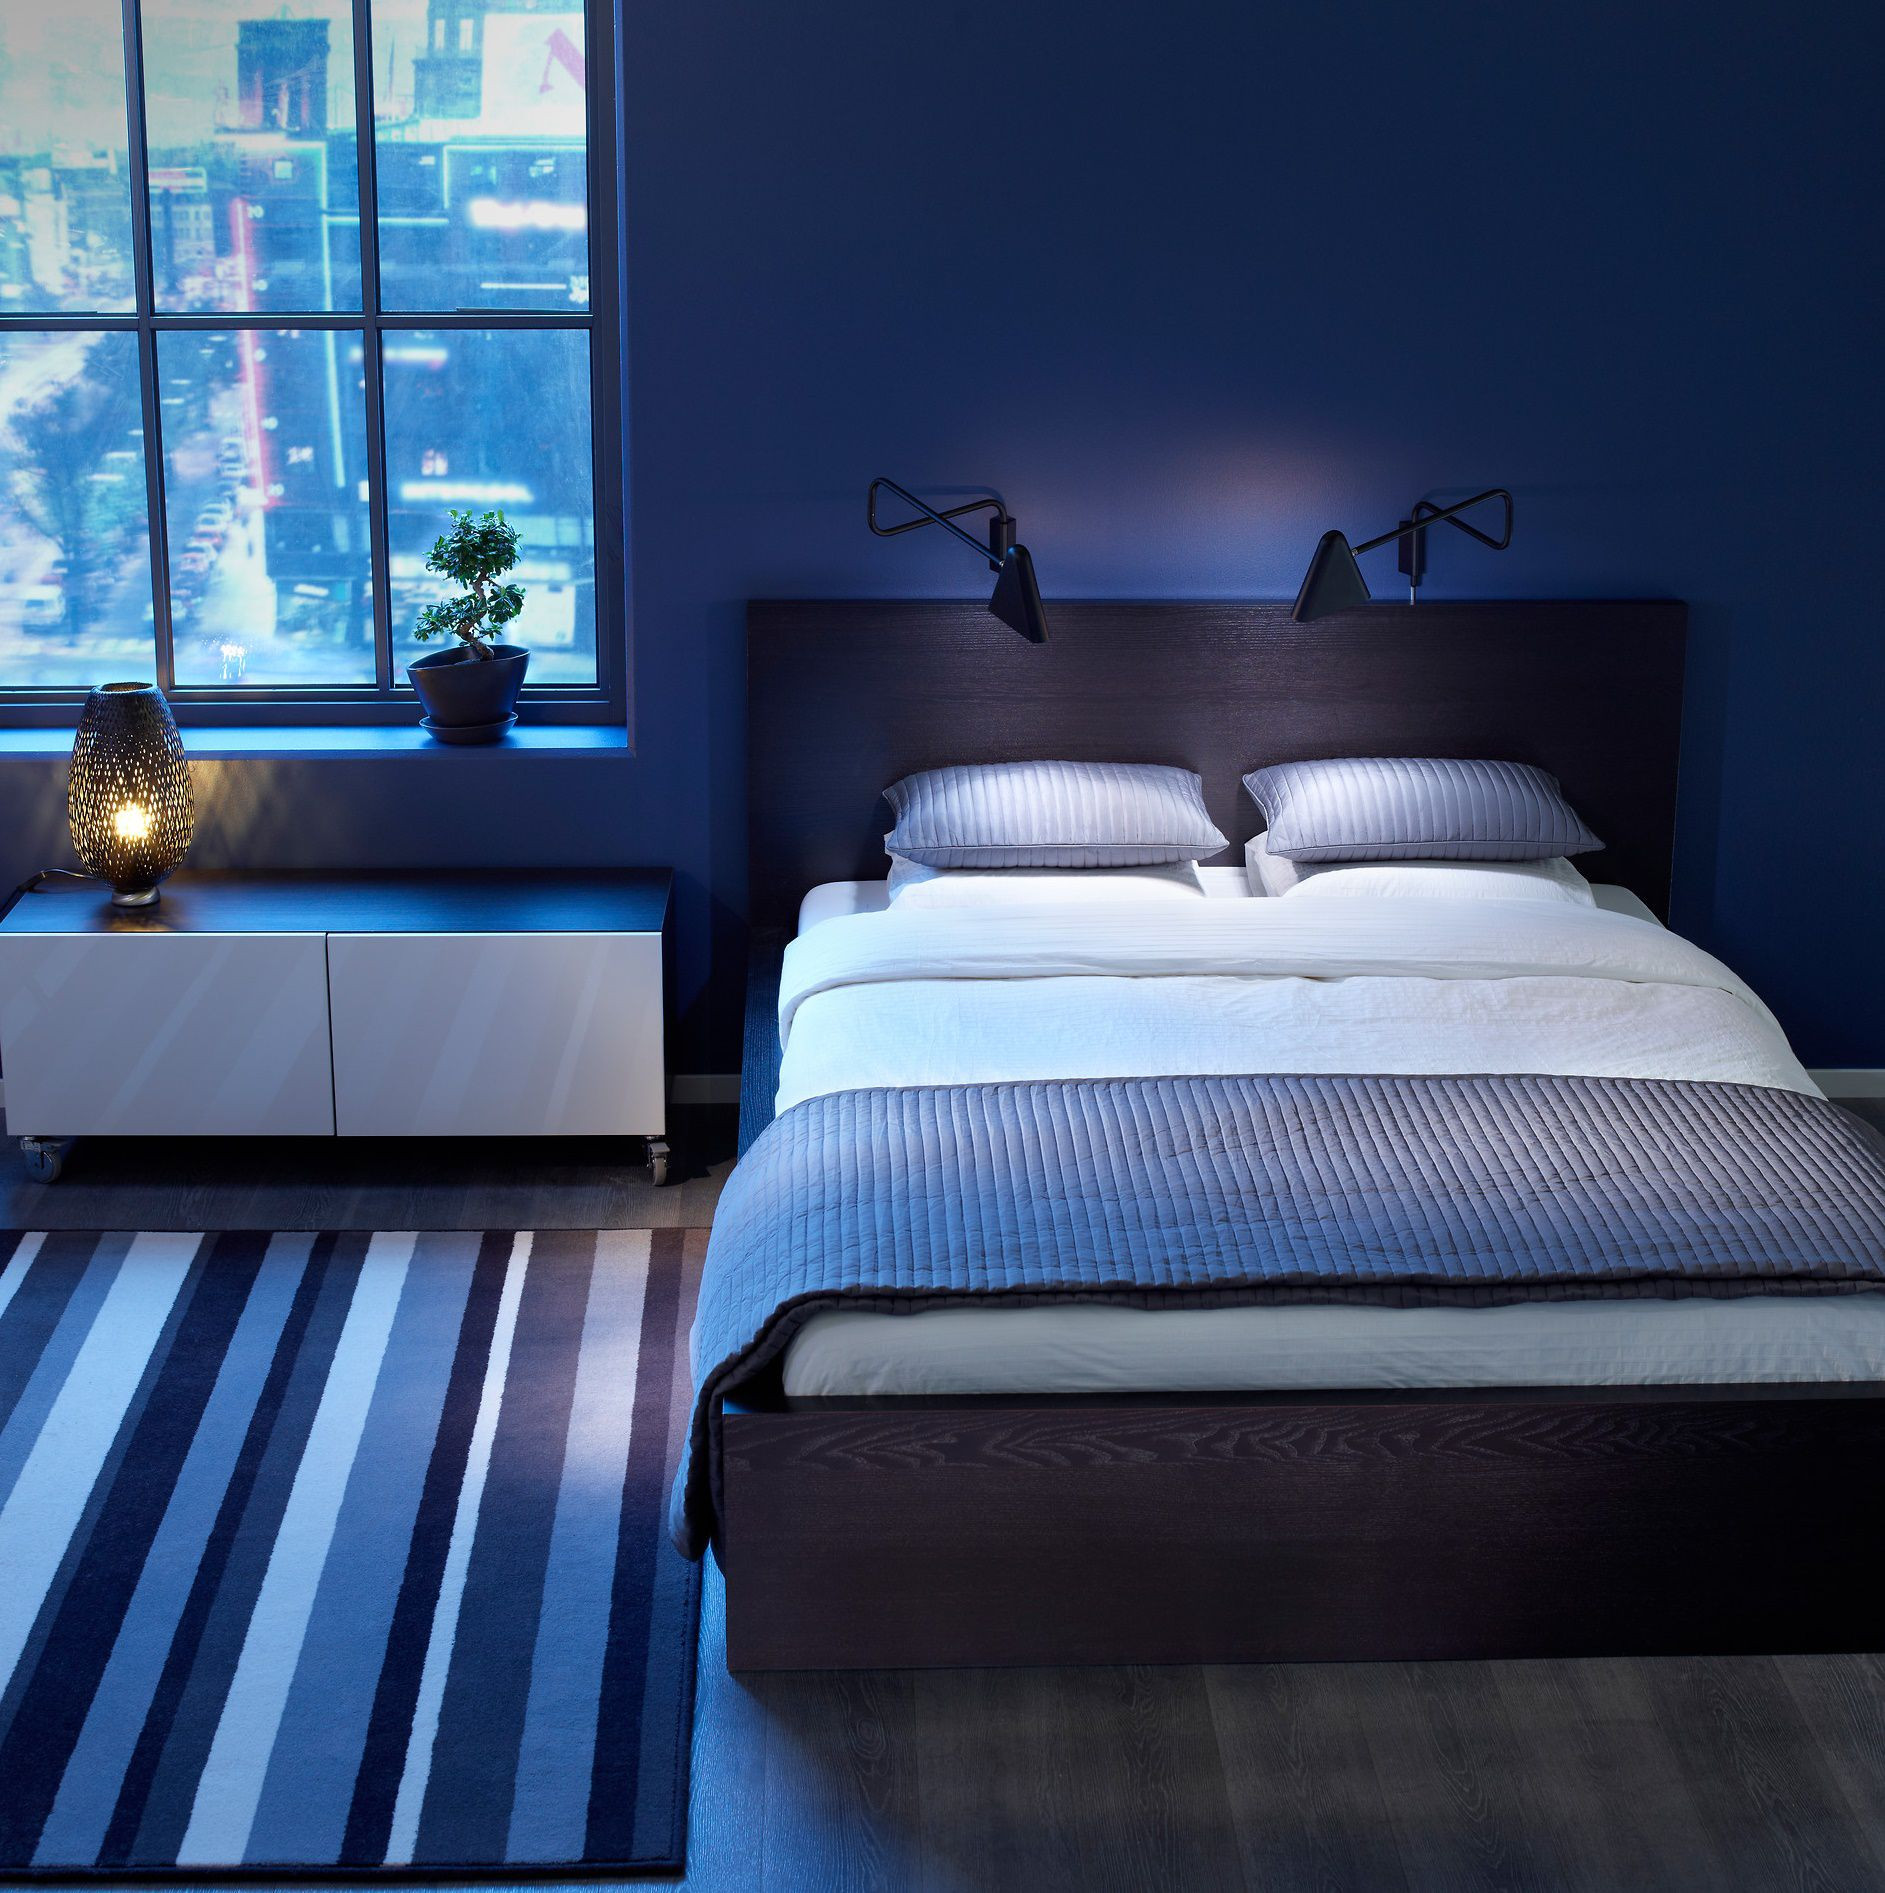 Bedroom Blue Walls
 How to Apply the Best Bedroom Wall Colors to Bring Happy